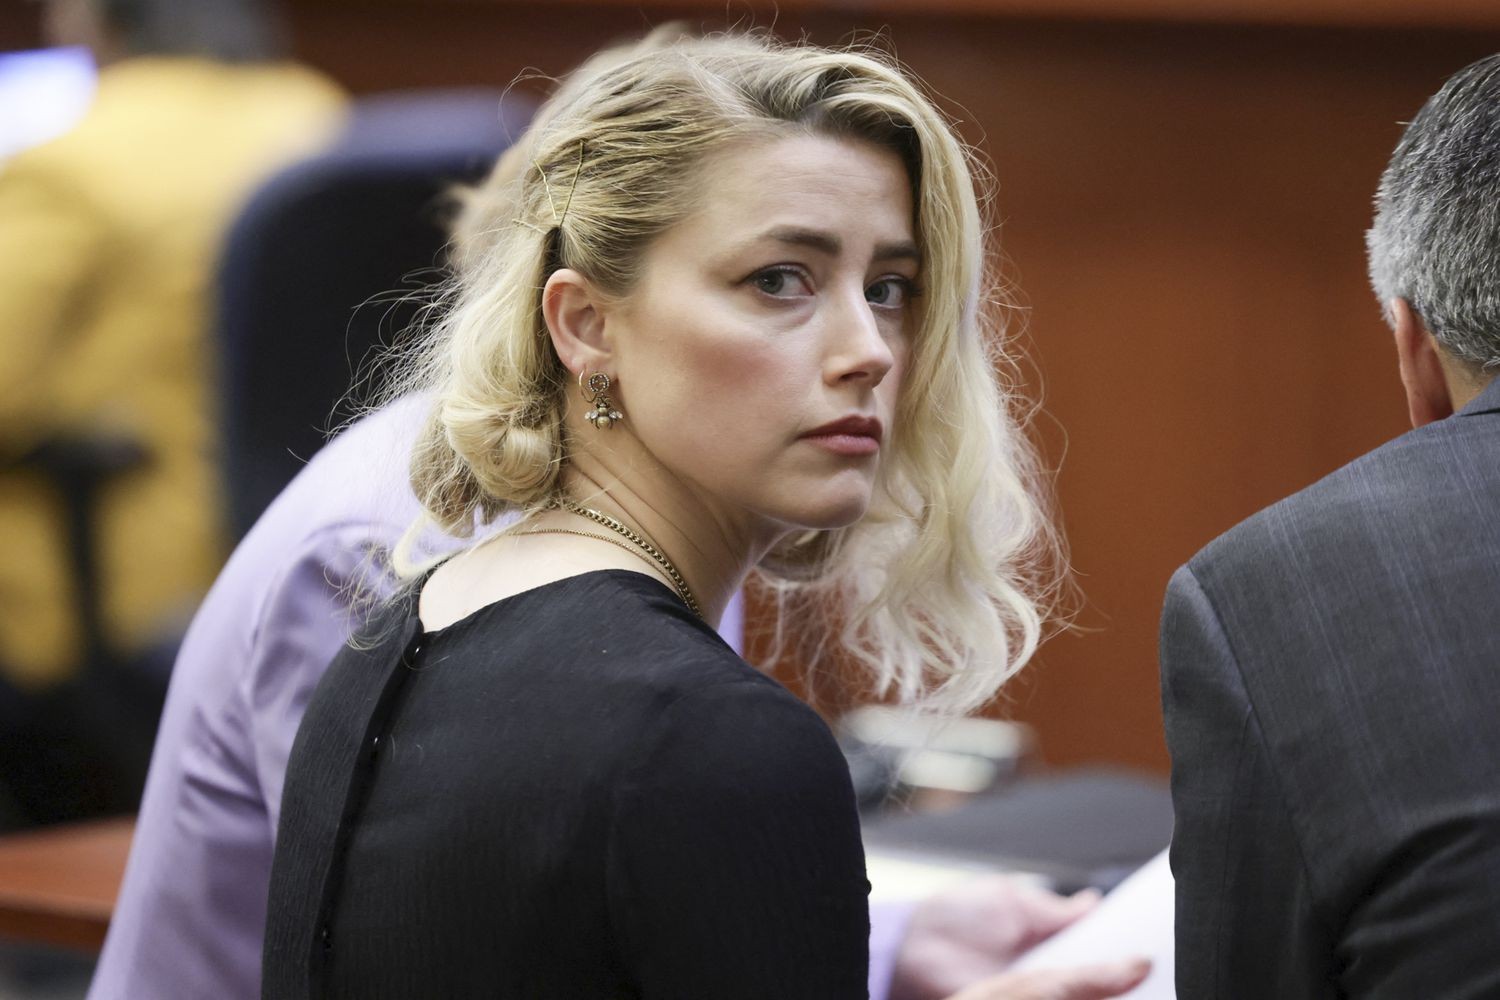 Amber Heard during the Depp defamation trial.